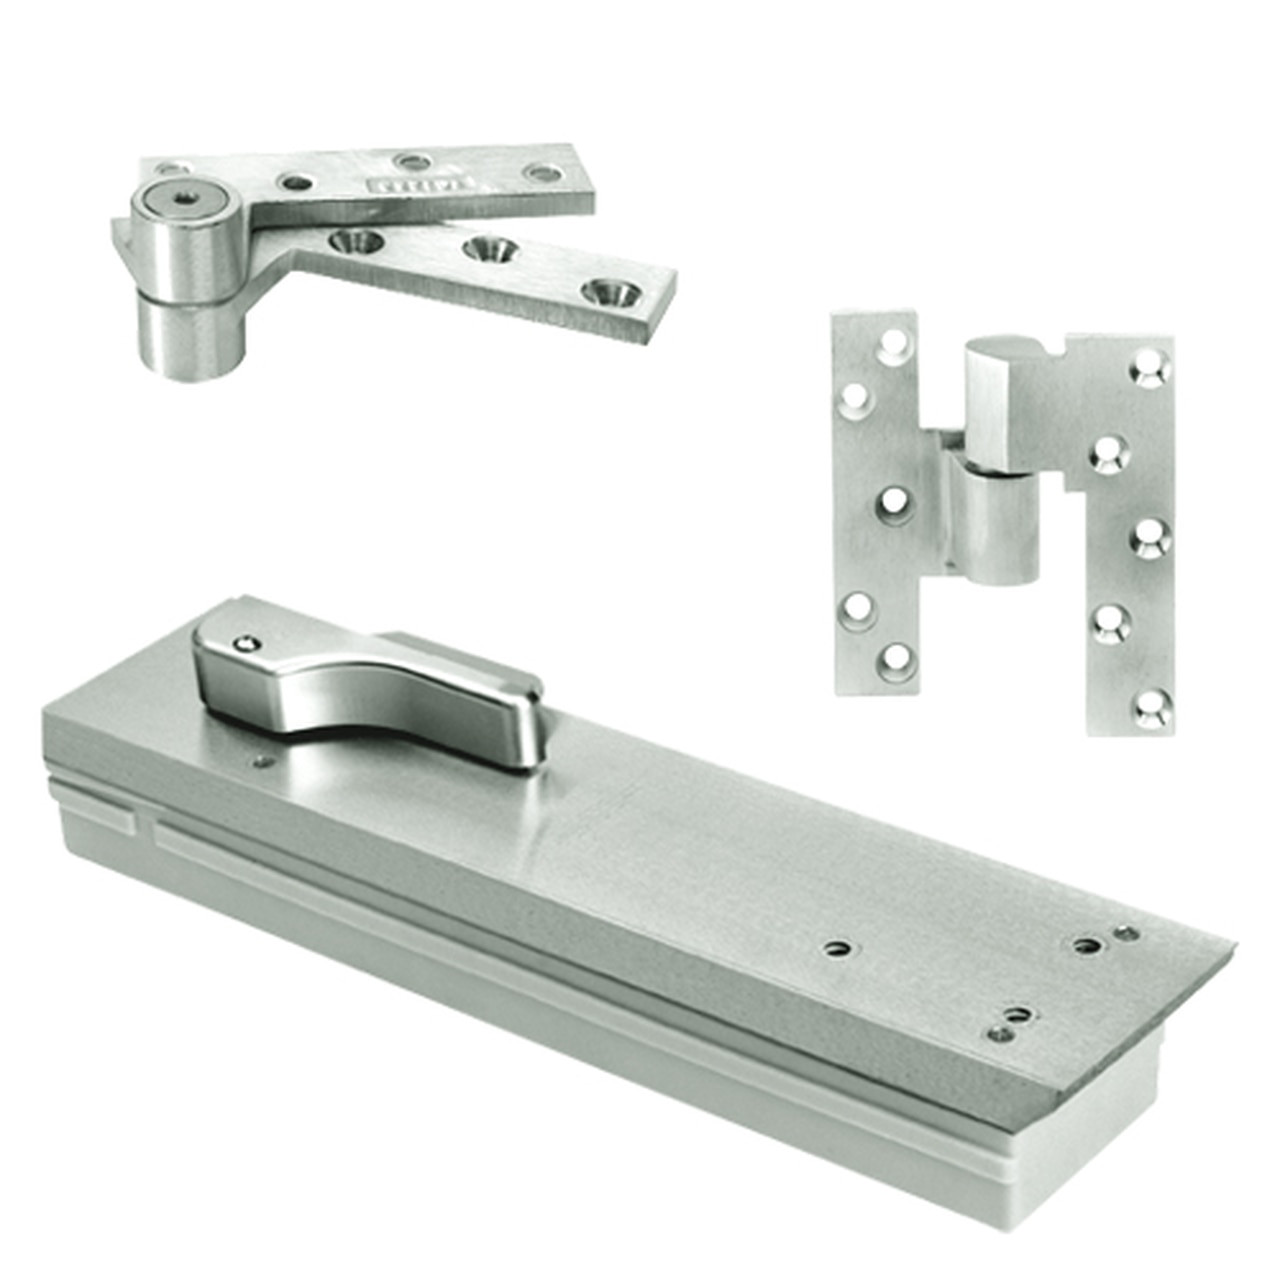 FQ5105NBC-SC-RH-618 Rixson Q51 Series Fire Rated 3/4" Offset Hung Shallow Depth Floor Closers in Bright Nickel Finish